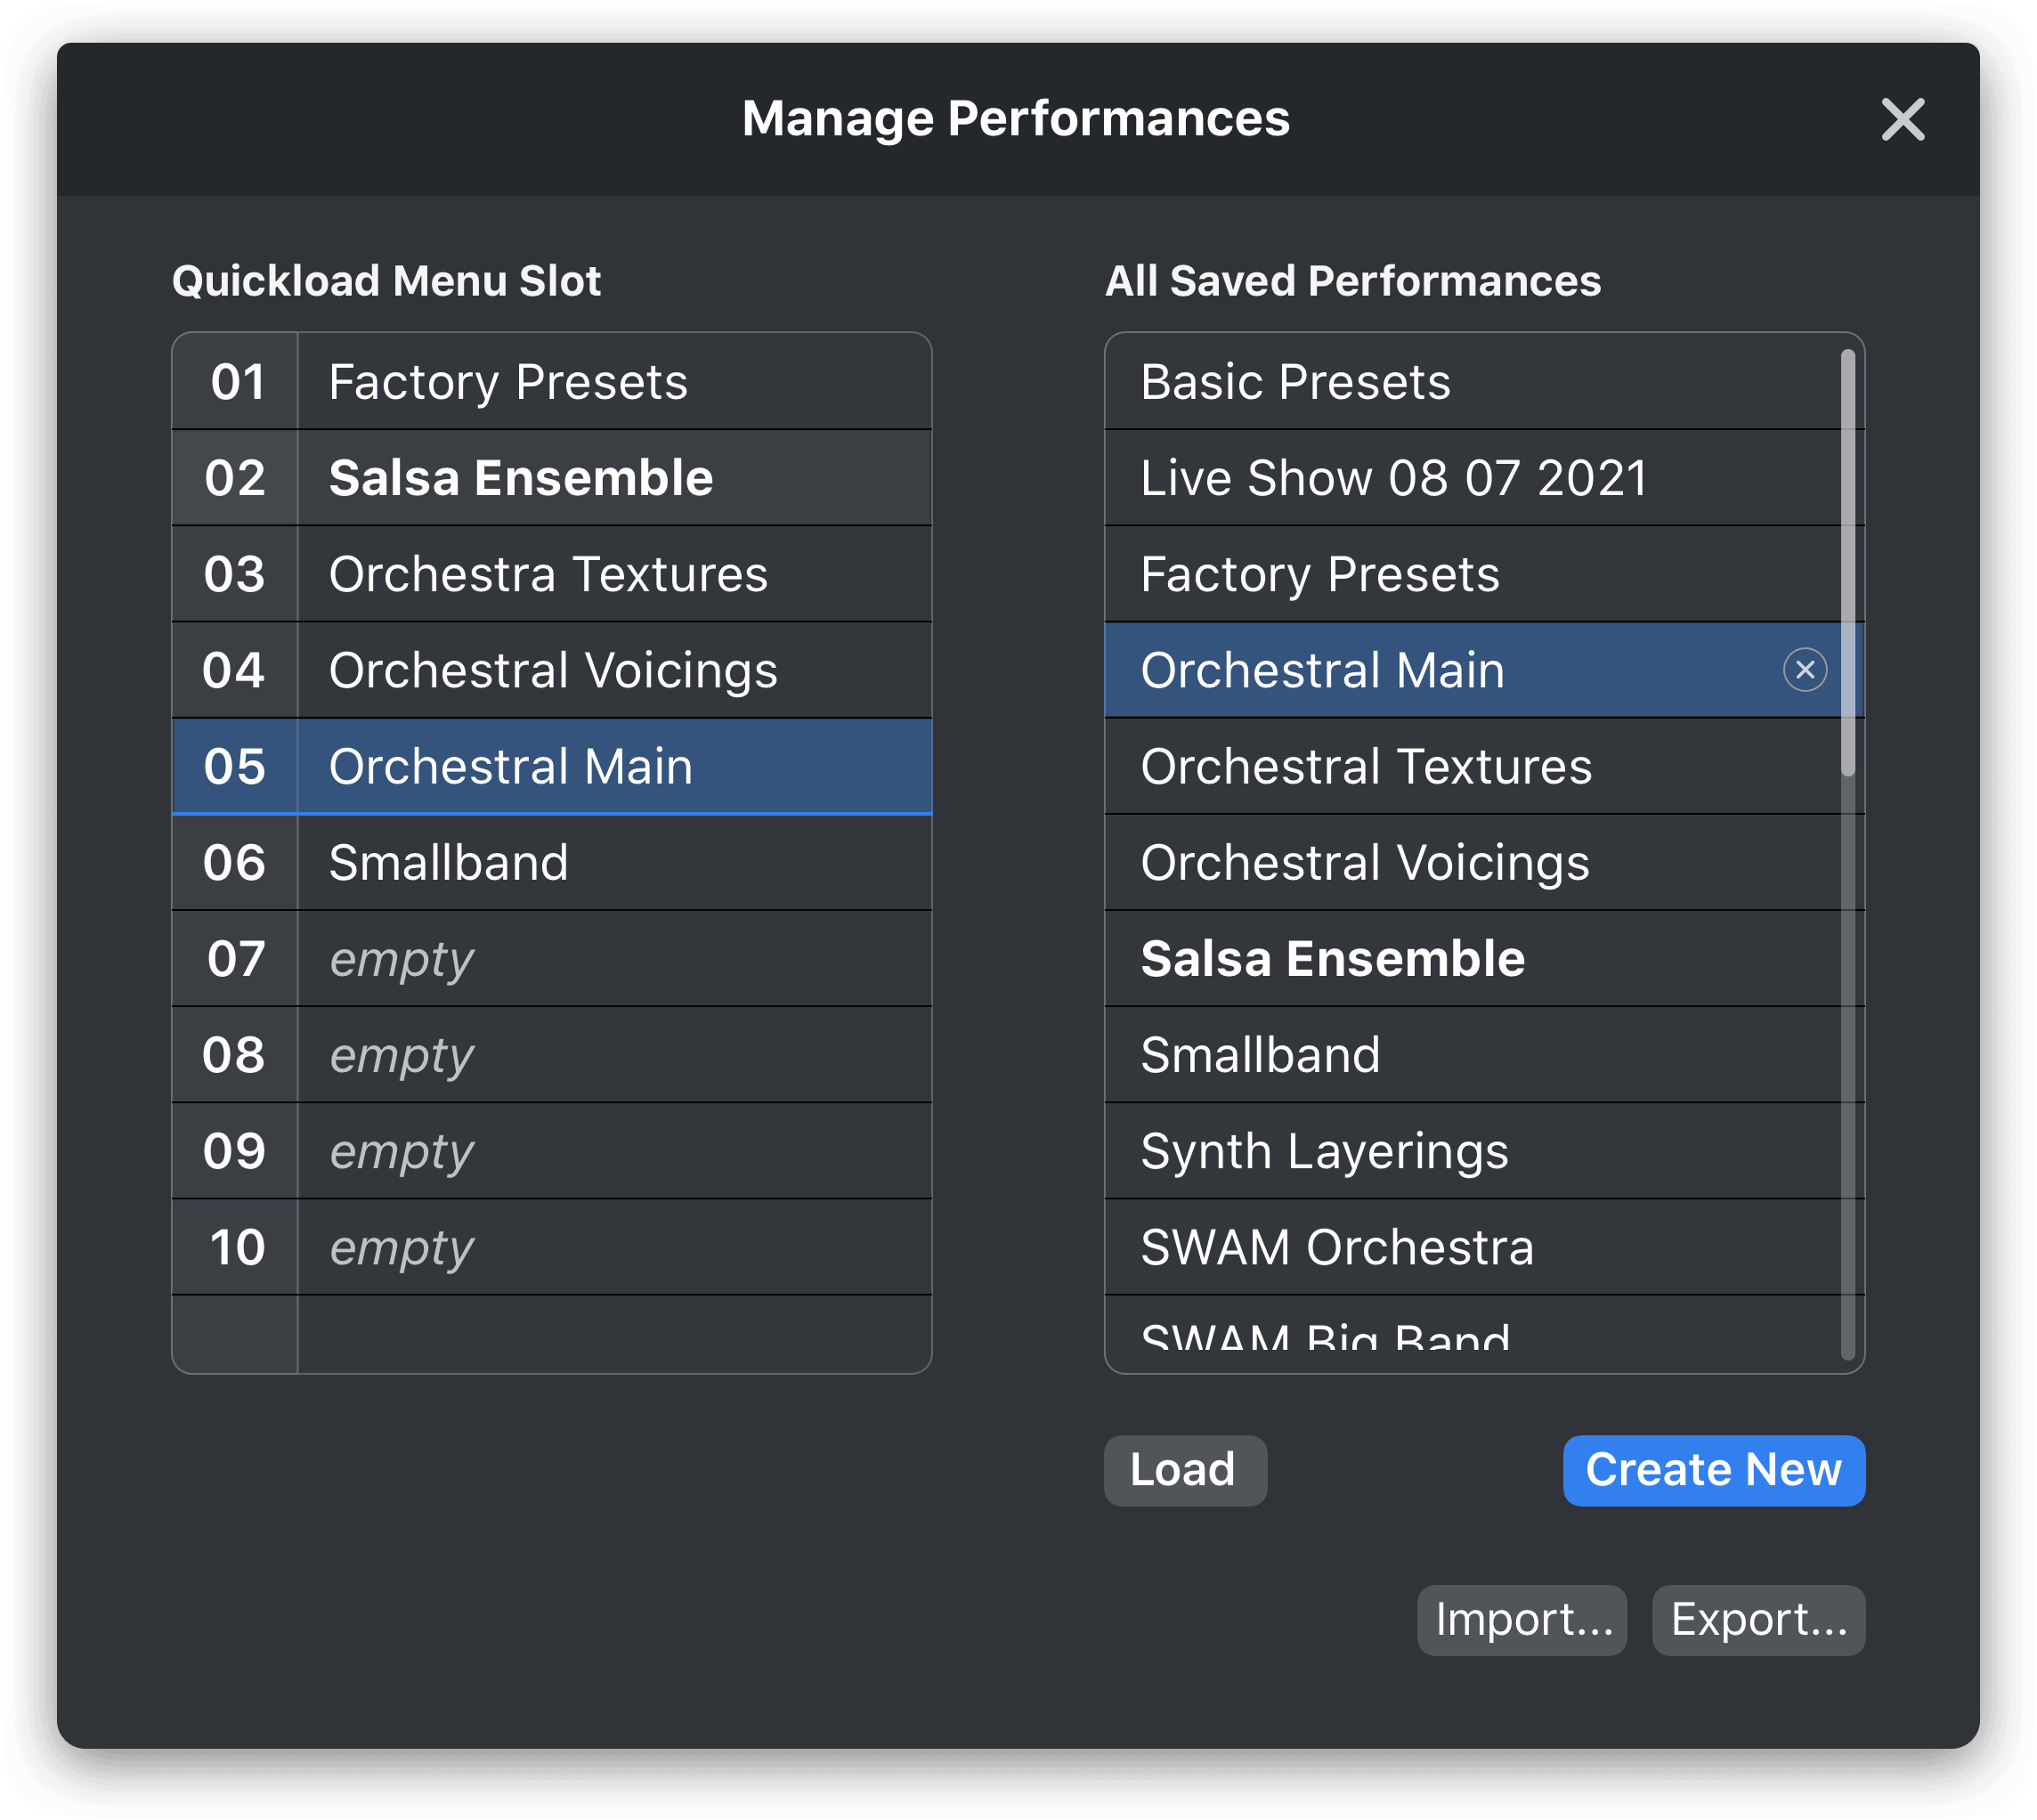 Save and export different layouts of presets in the Performance Manager